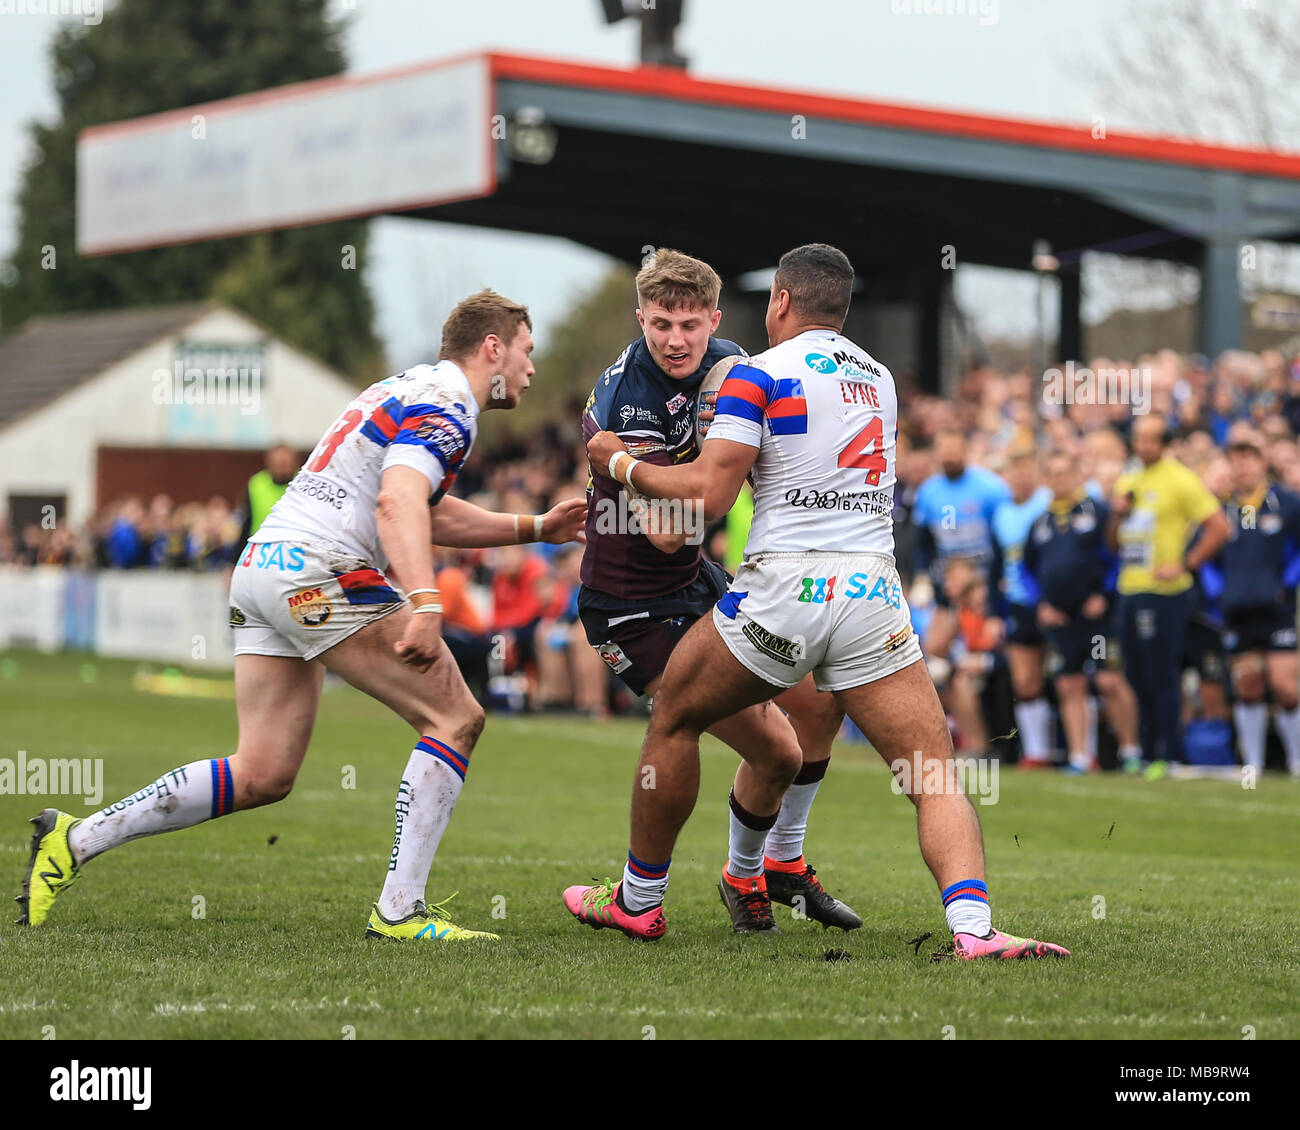 Wakefield, UK. 8th April 2018, Beaumont Legal Stadium, Wakefield, England; Betfred Super League rugby, Wakefield Trinity v Leeds Rhinos;Liam Sutcliffe of Leeds Rhinos is tackled by Reece Lyne of Wakefield Trinity Credit: News Images/Alamy Live News Stock Photo